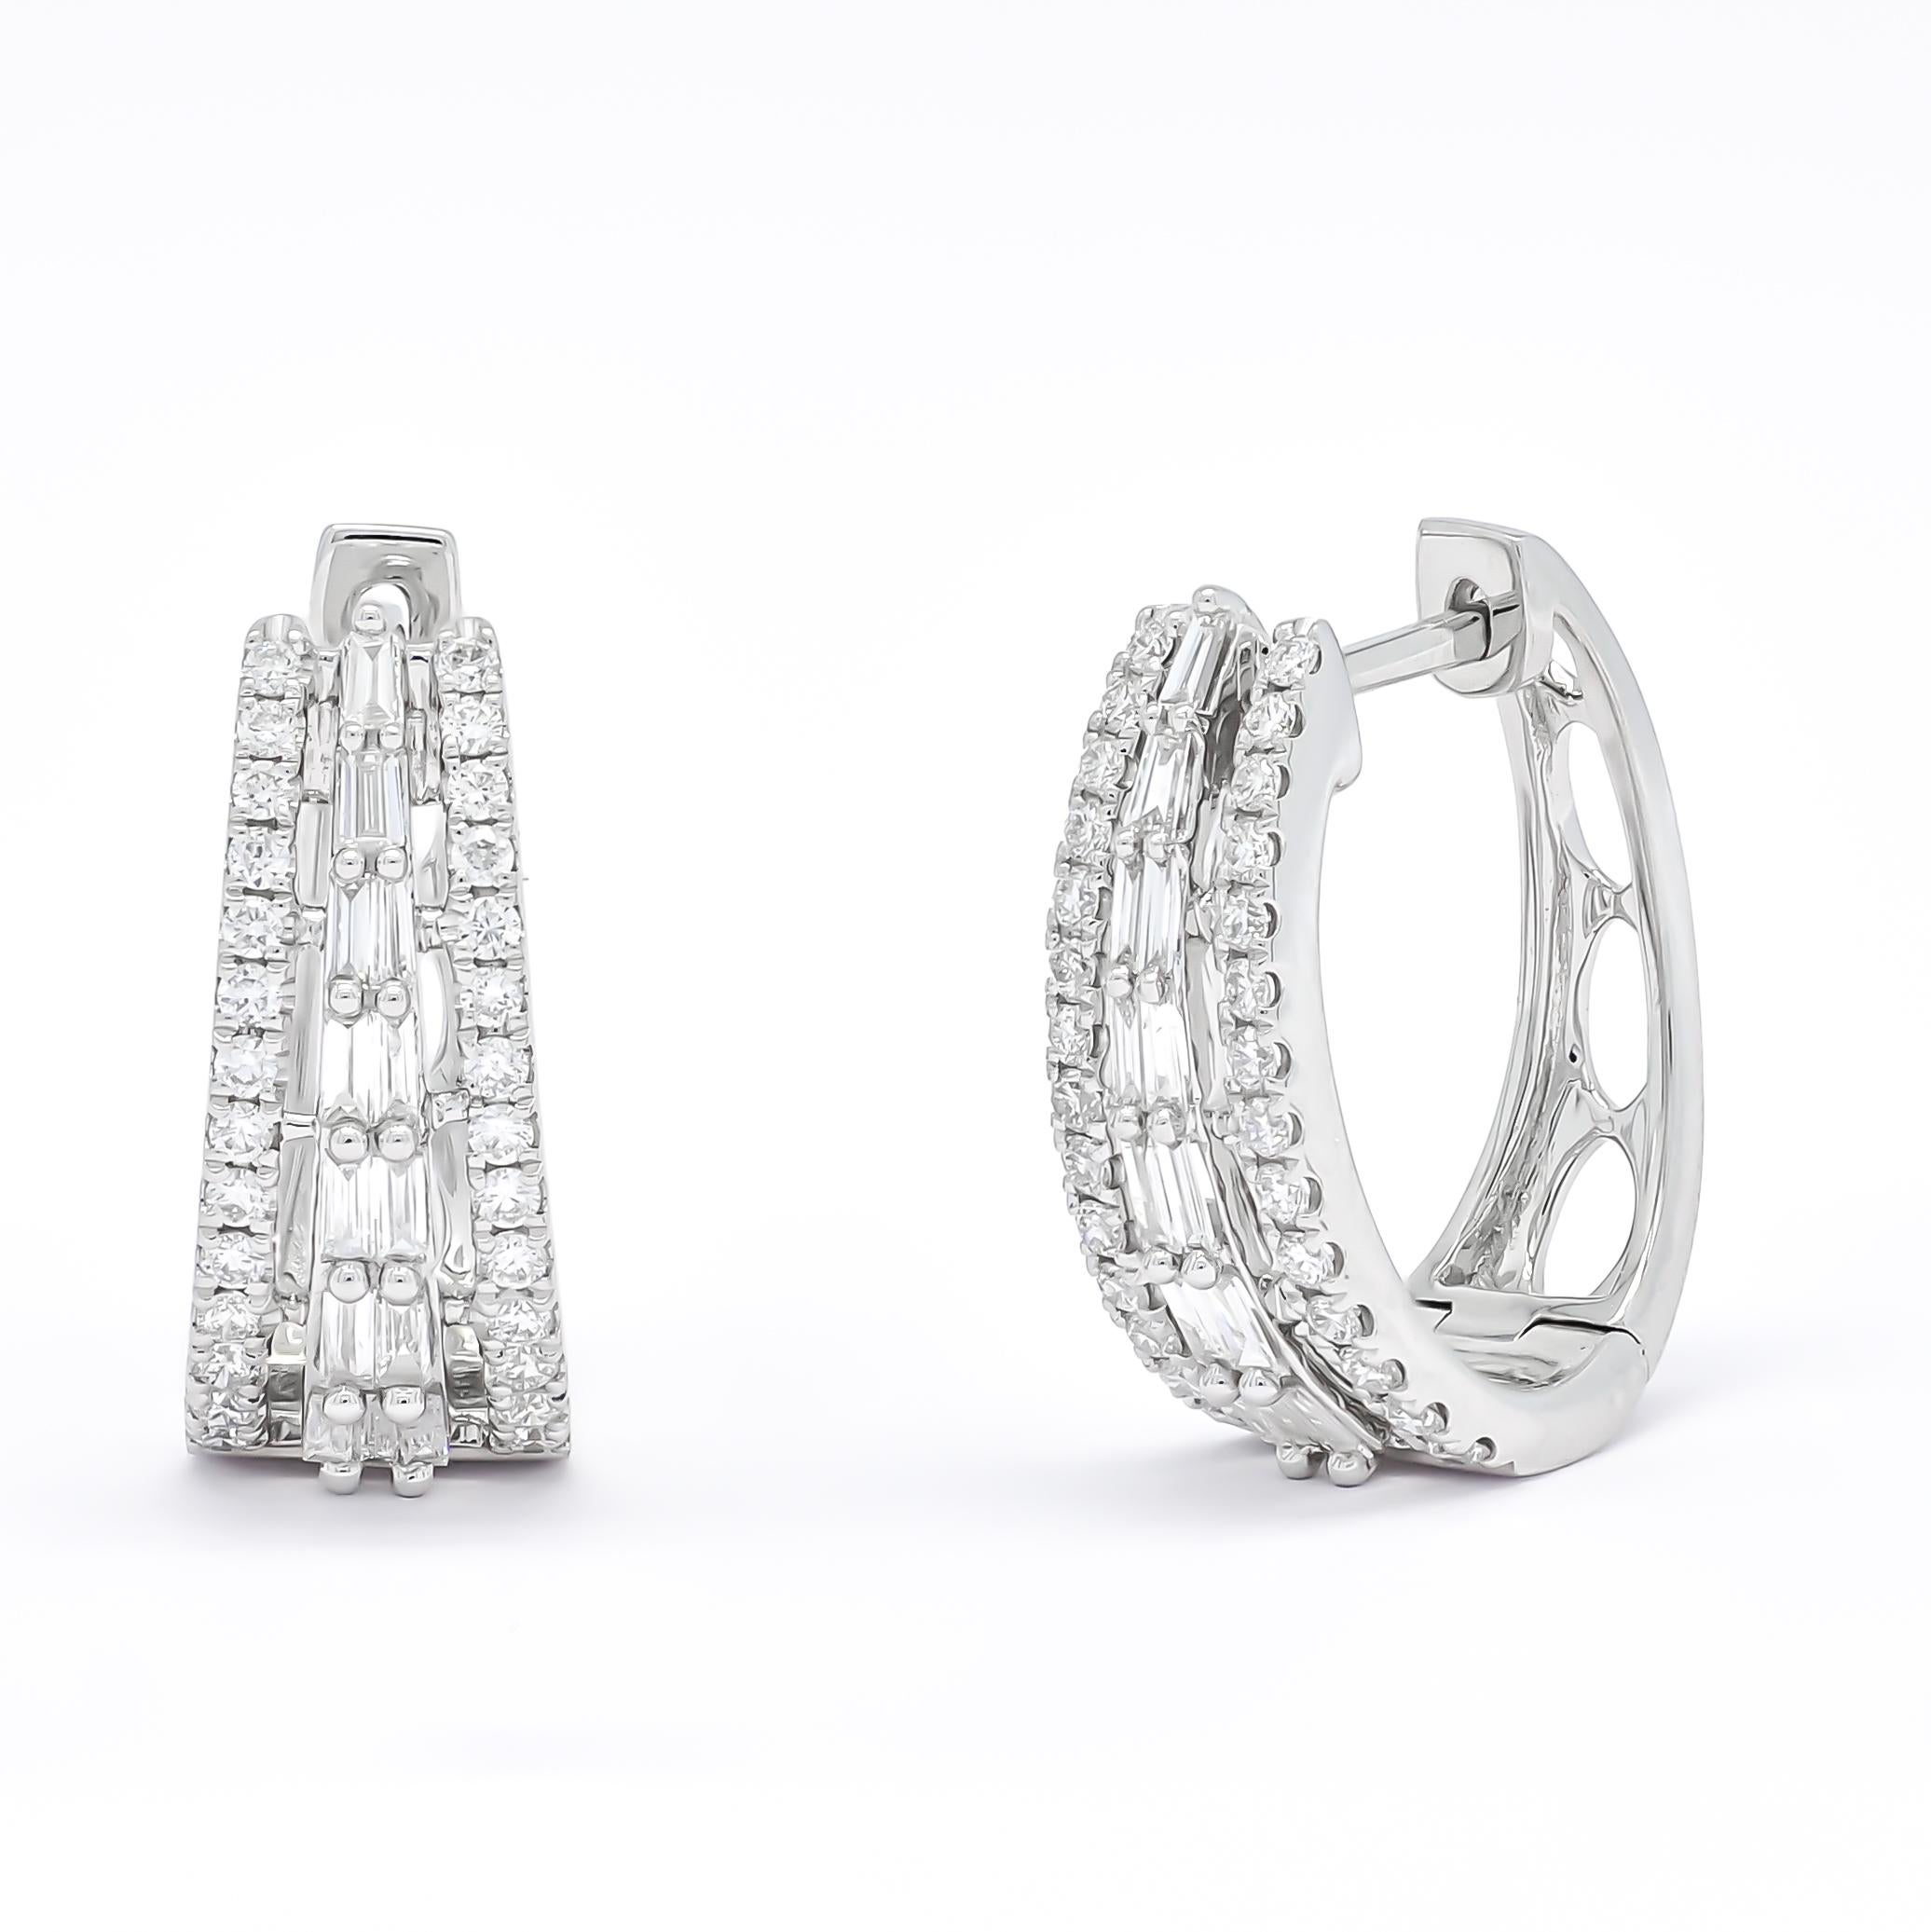 Modern Natural Diamonds 0.74 carats 18KT White Gold Hoop Huggies Earrings For Sale